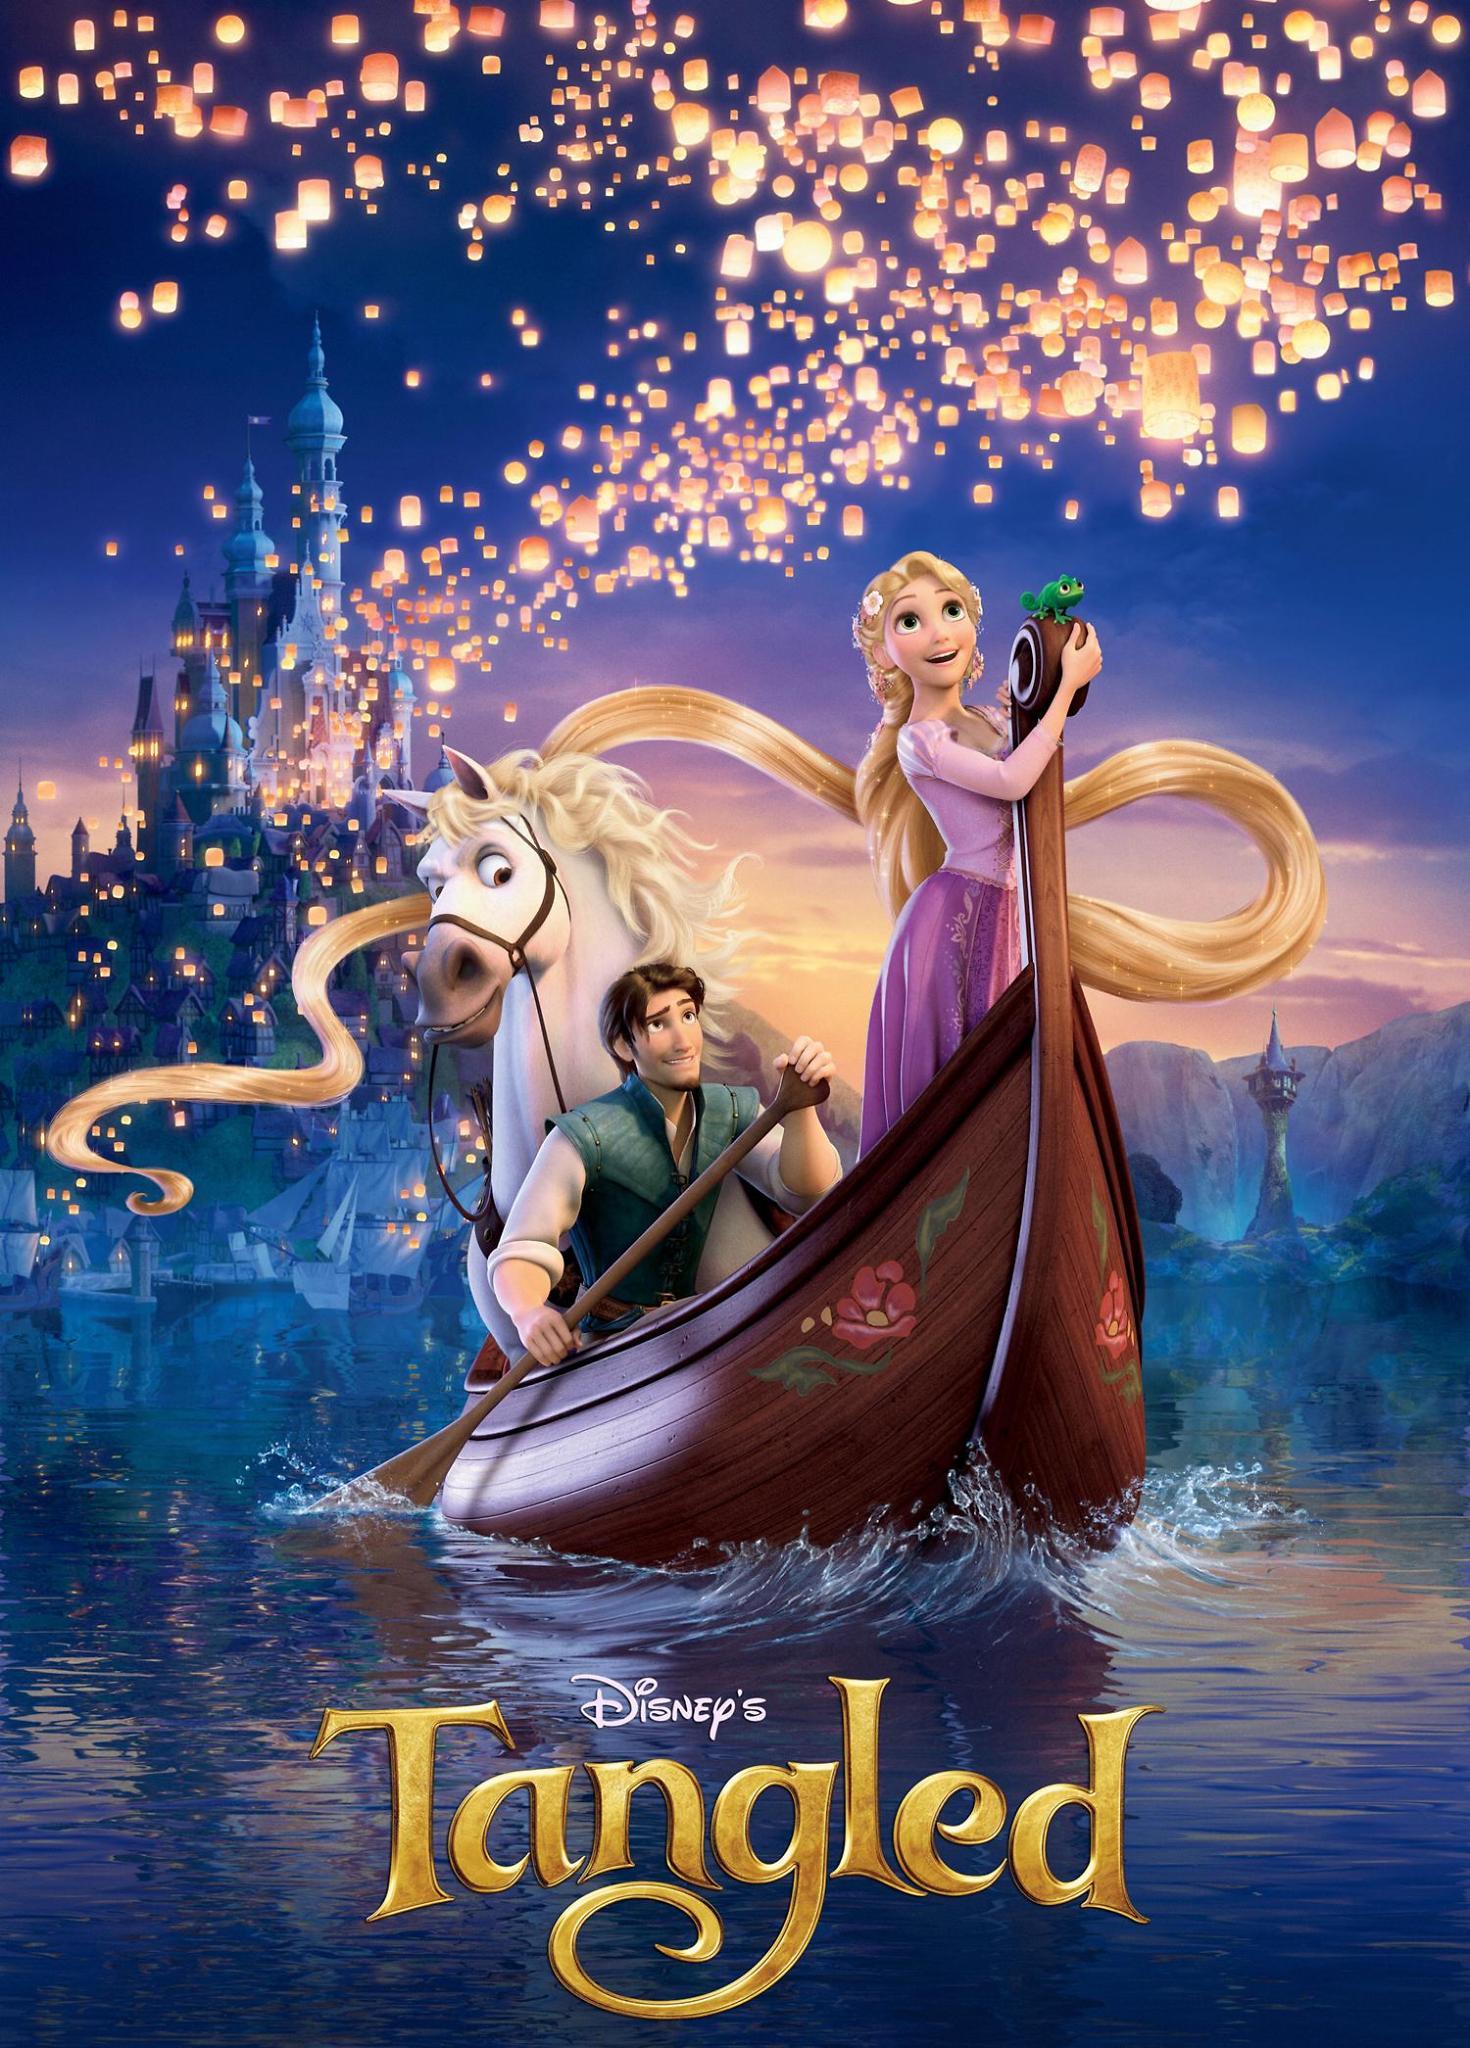 Which Tangled character are you??? 